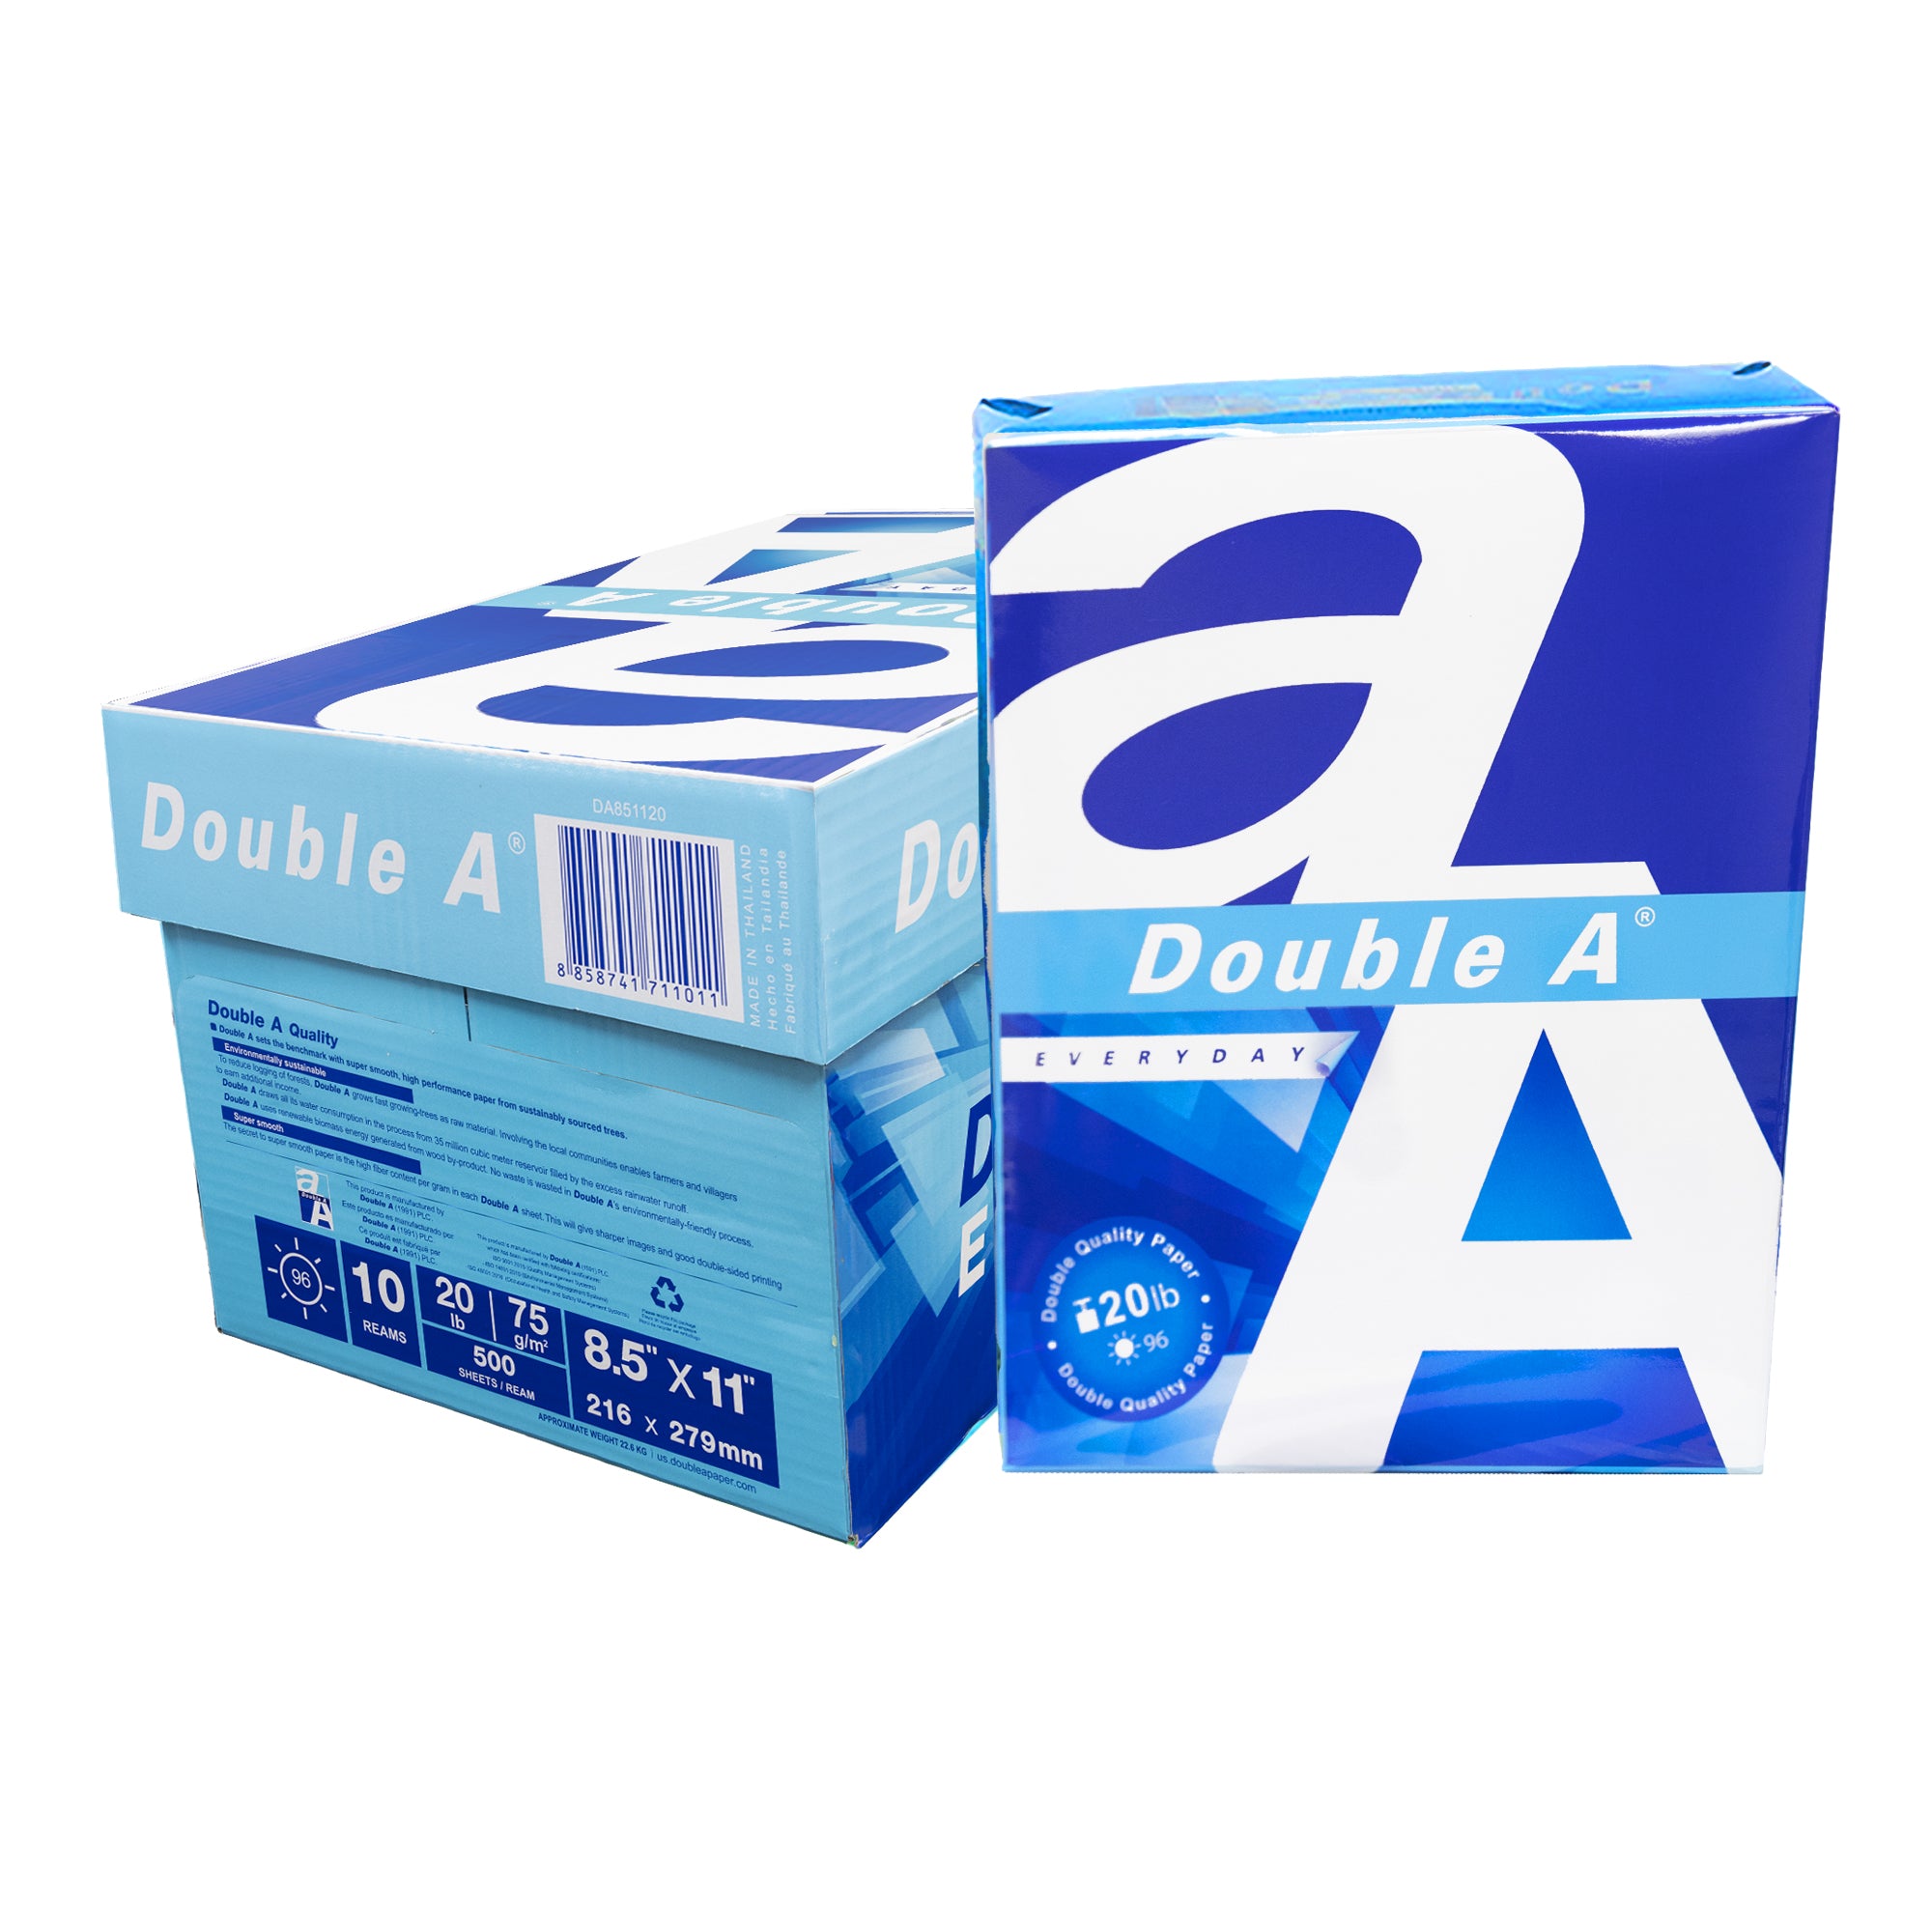 Double A Everyday Multi Use Printer Copier Paper Letter Size 8 12